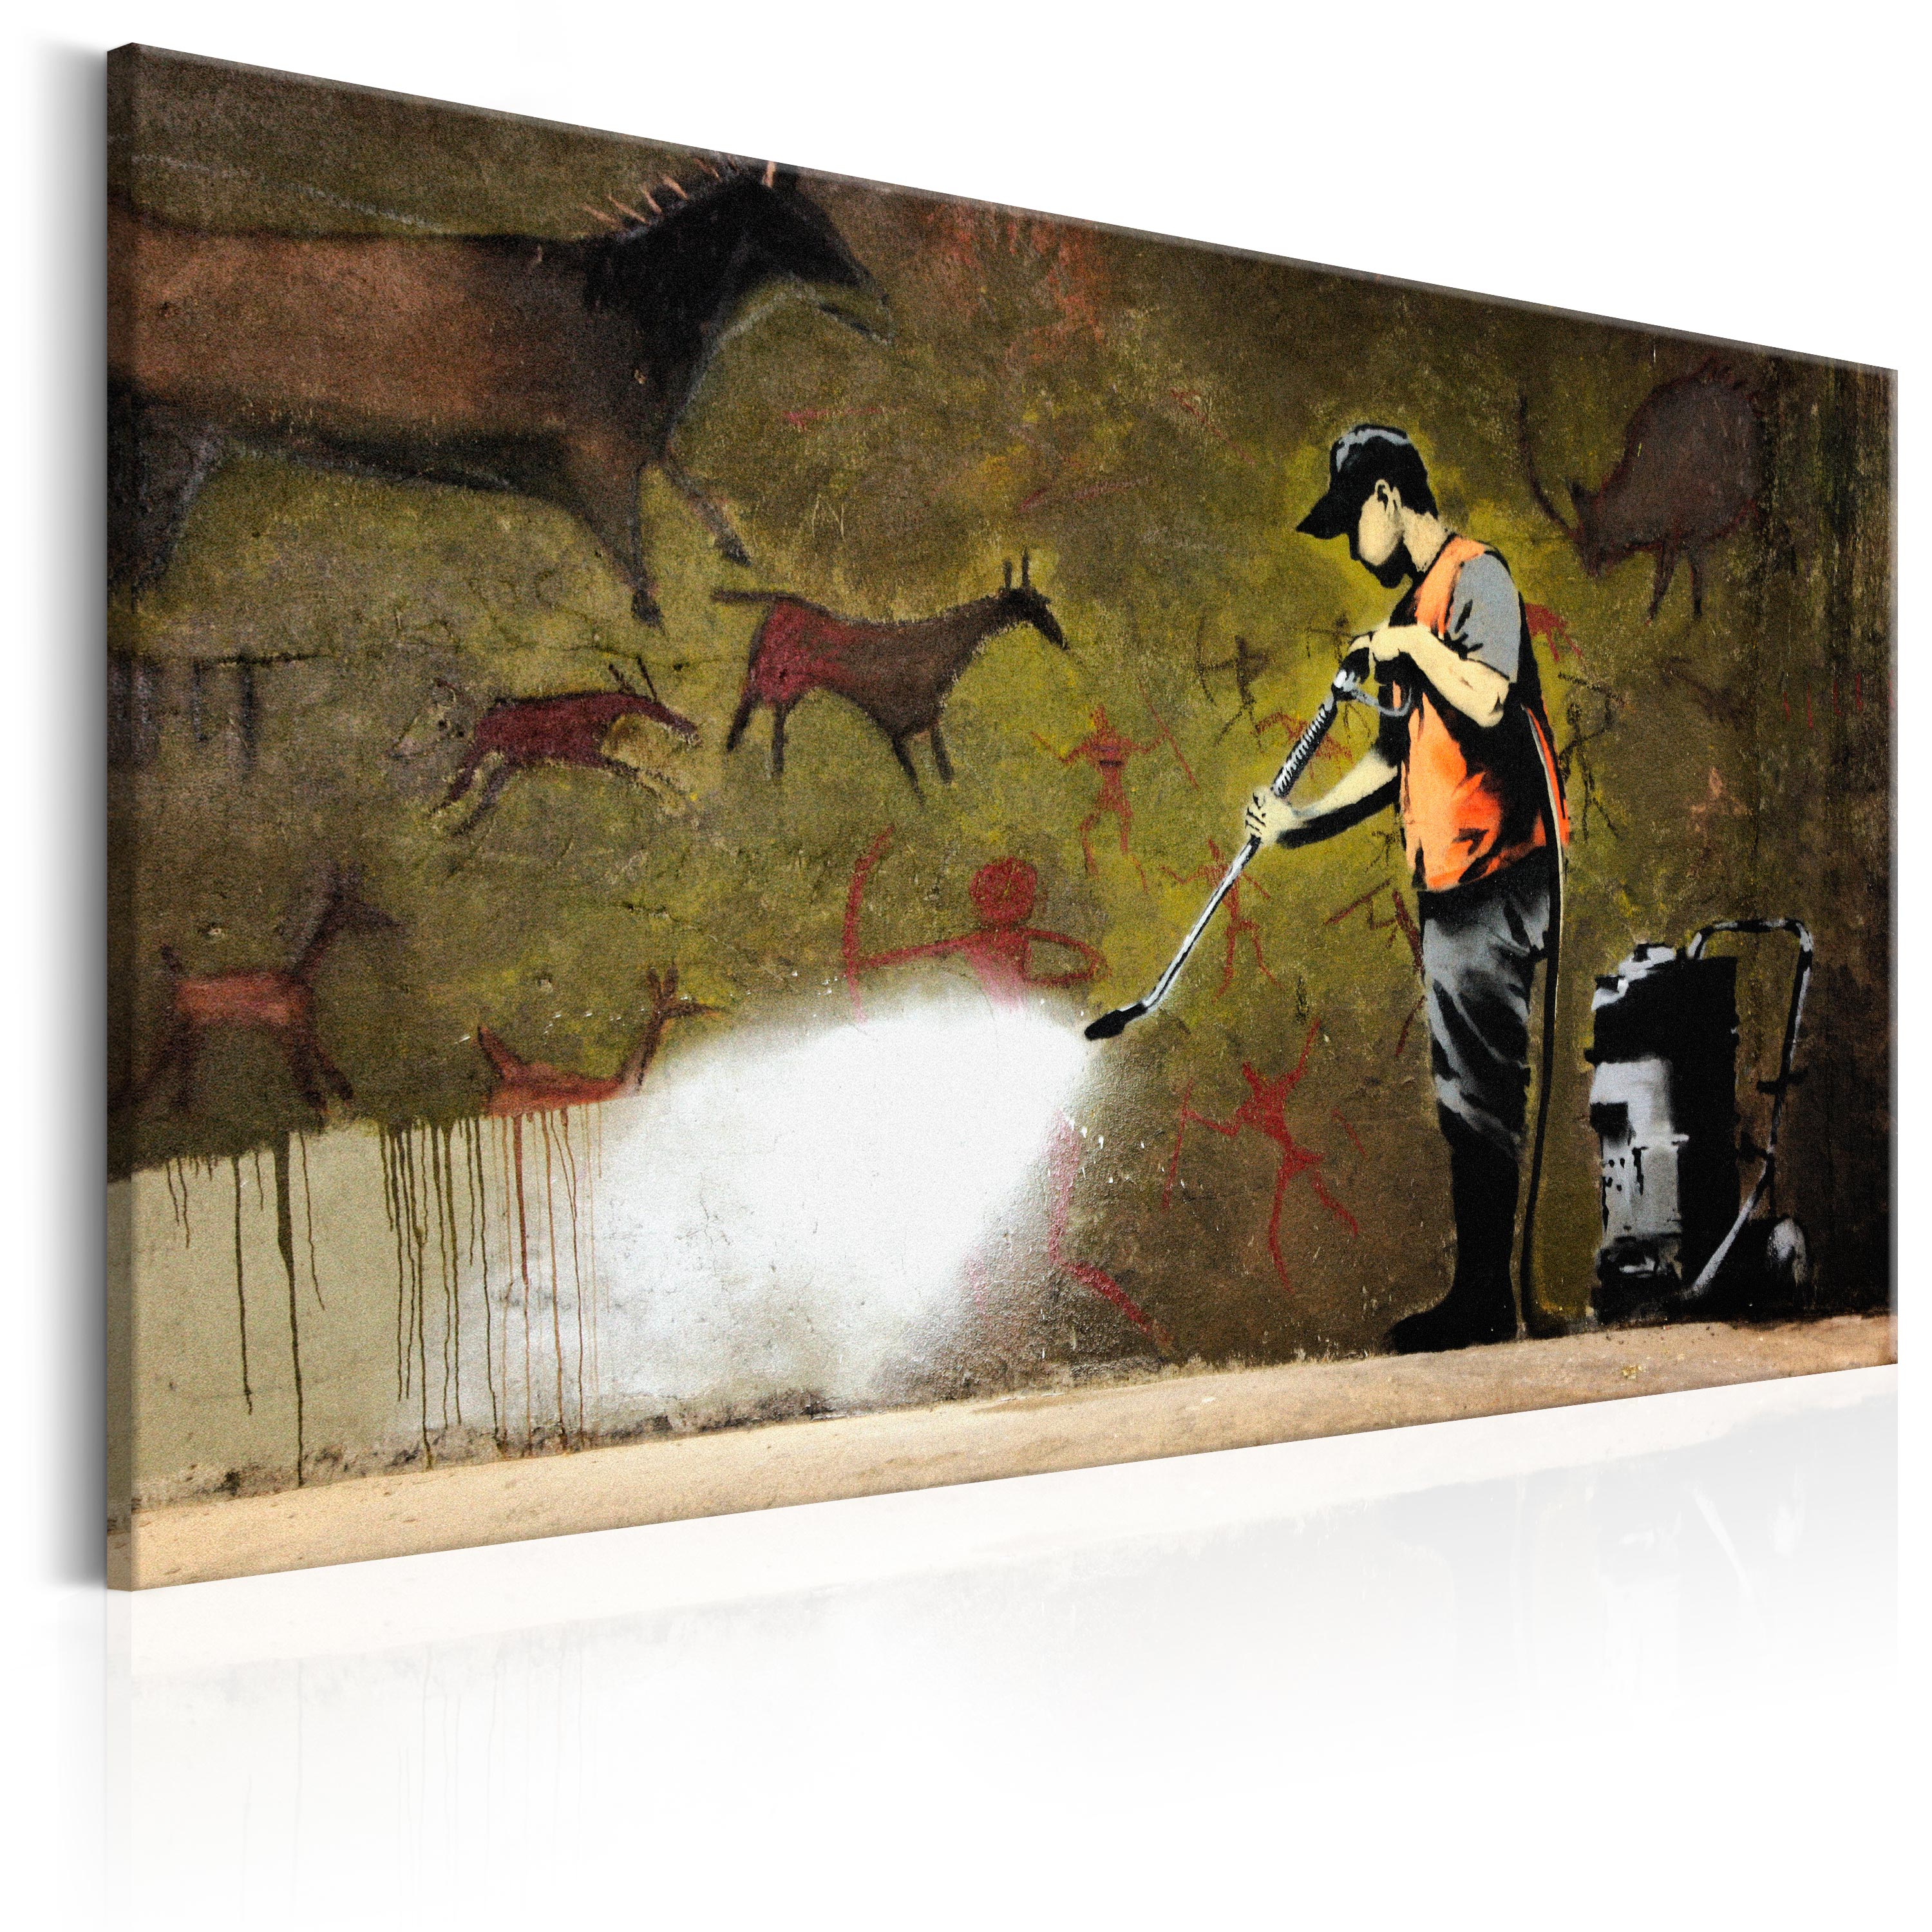 Canvas Print - Cave Painting by Banksy - 60x40